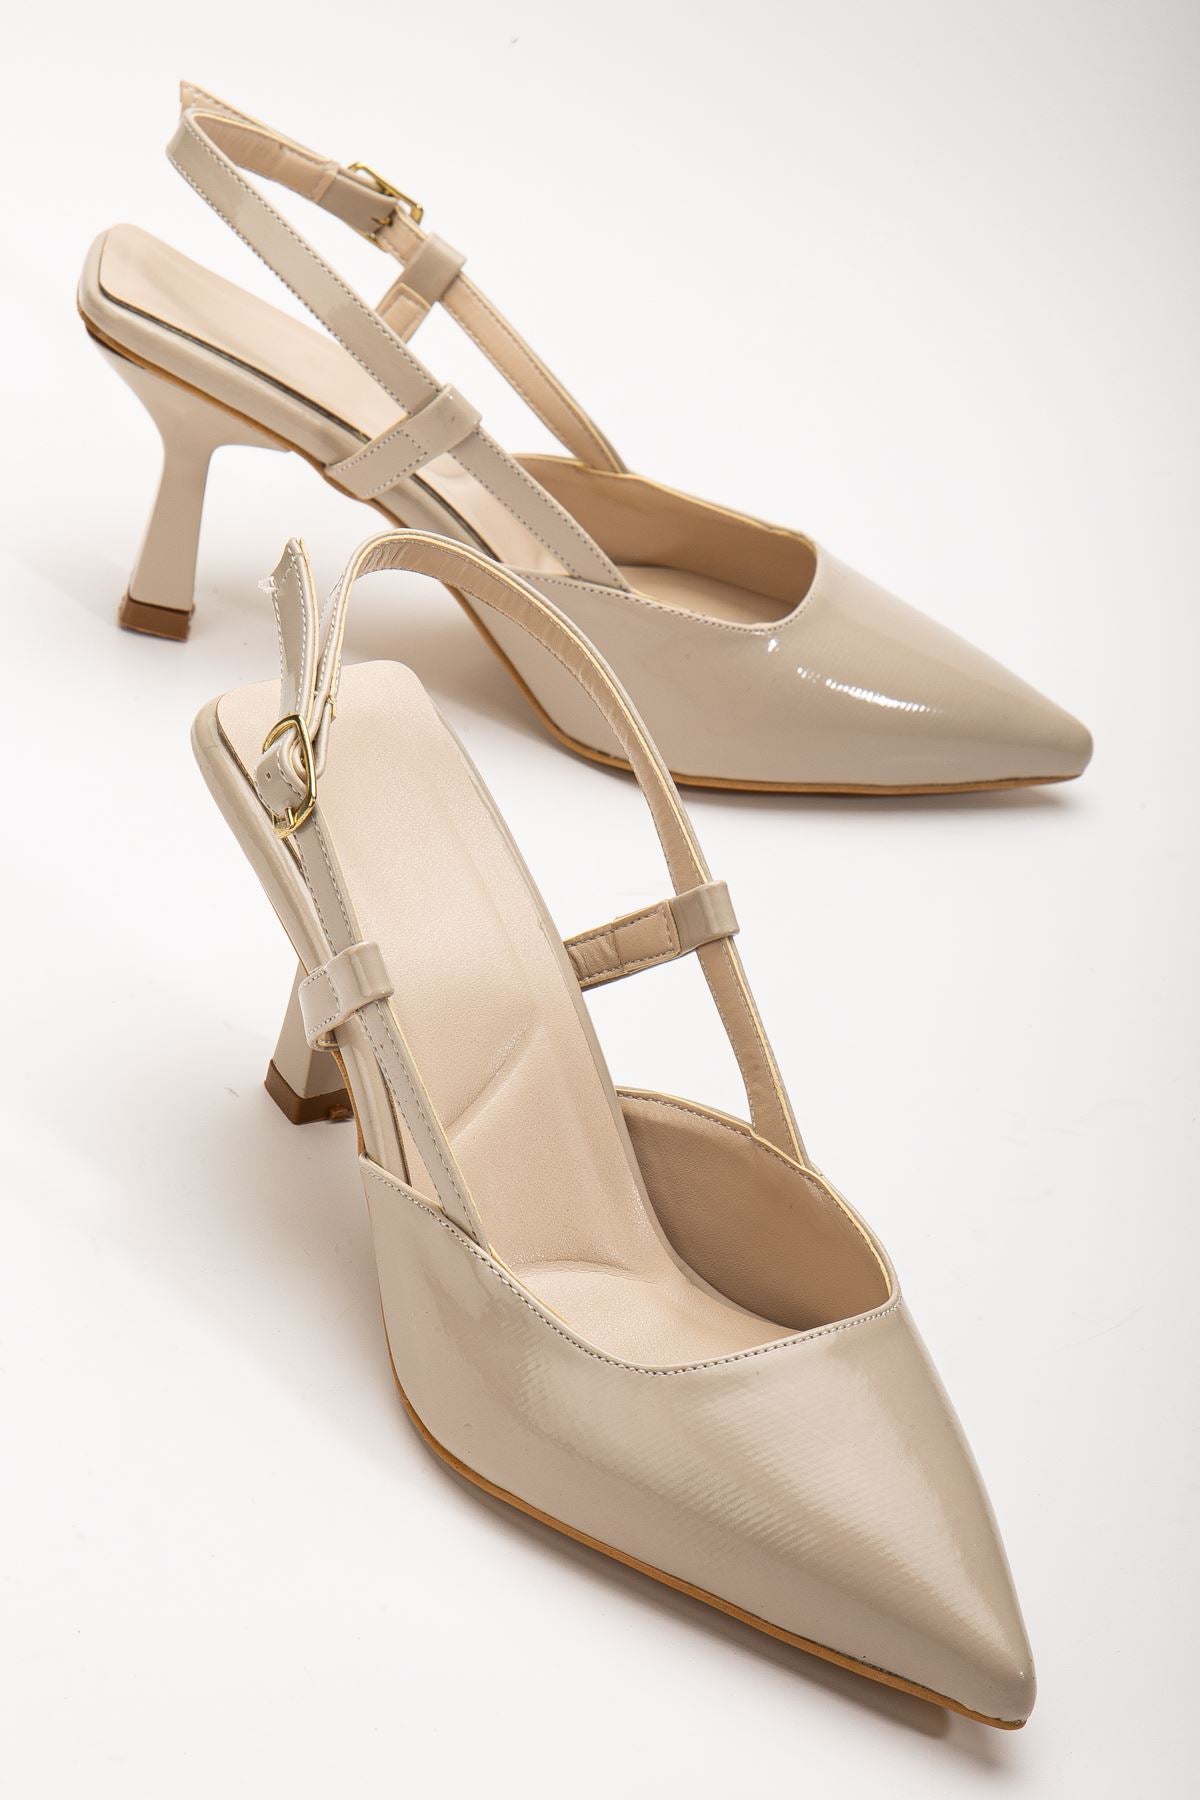 Women's Beige Patent Leather Thin Heeled Shoes - STREETMODE™